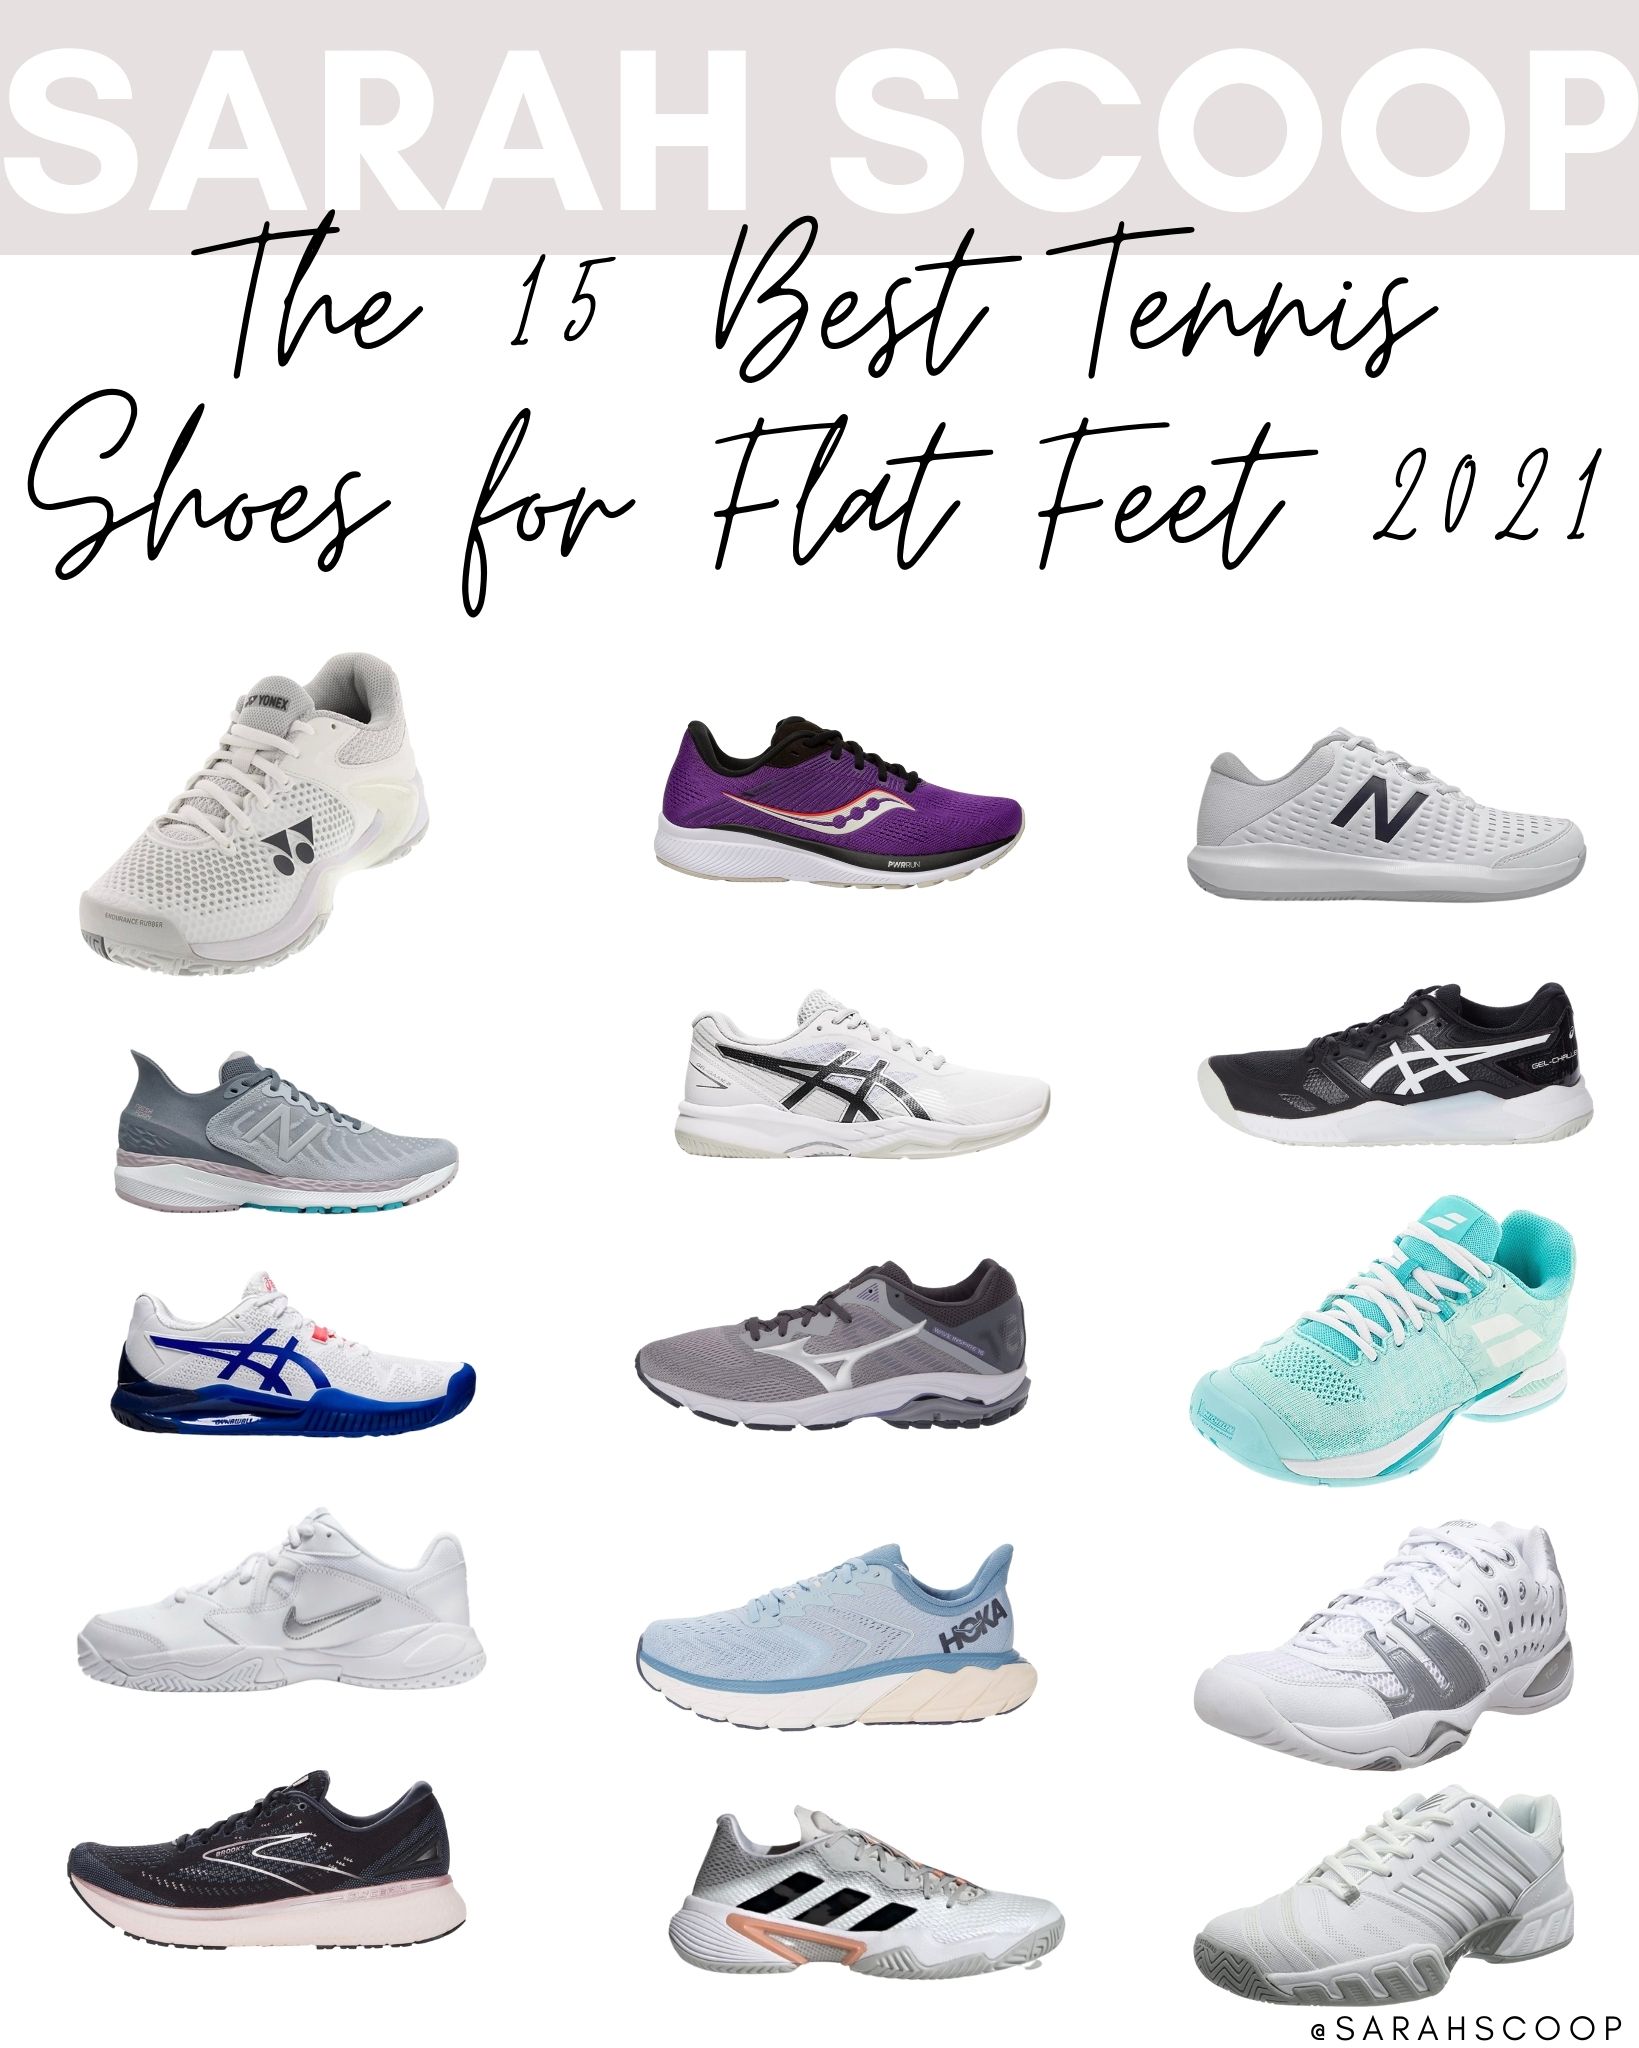 The 15 Best Tennis Shoes for Flat Feet [2022] - Sarah Scoop